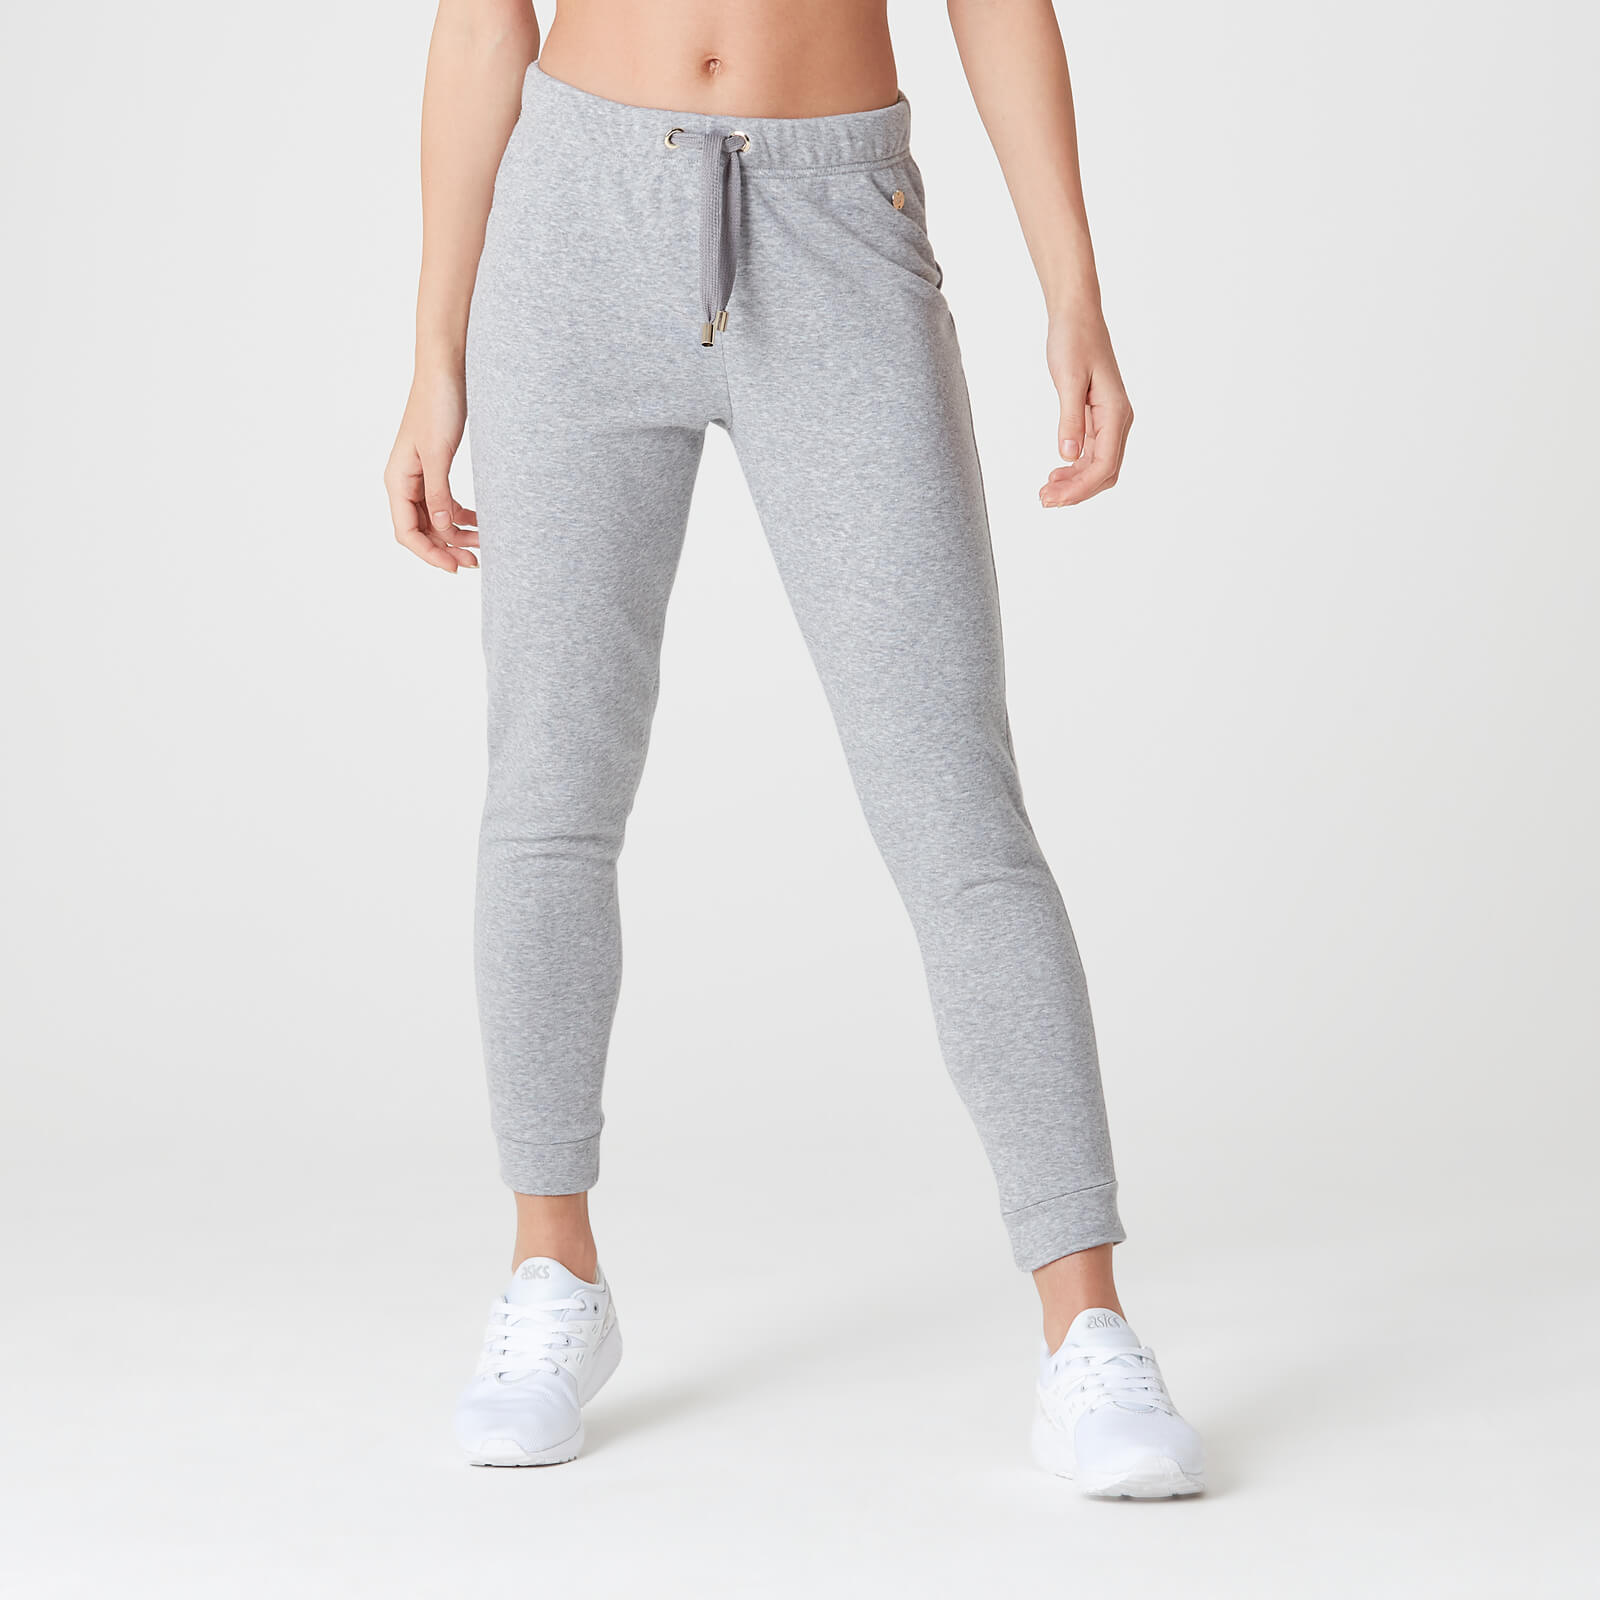 Myprotein Luxe Lounge Jogger - Grey Marl - L